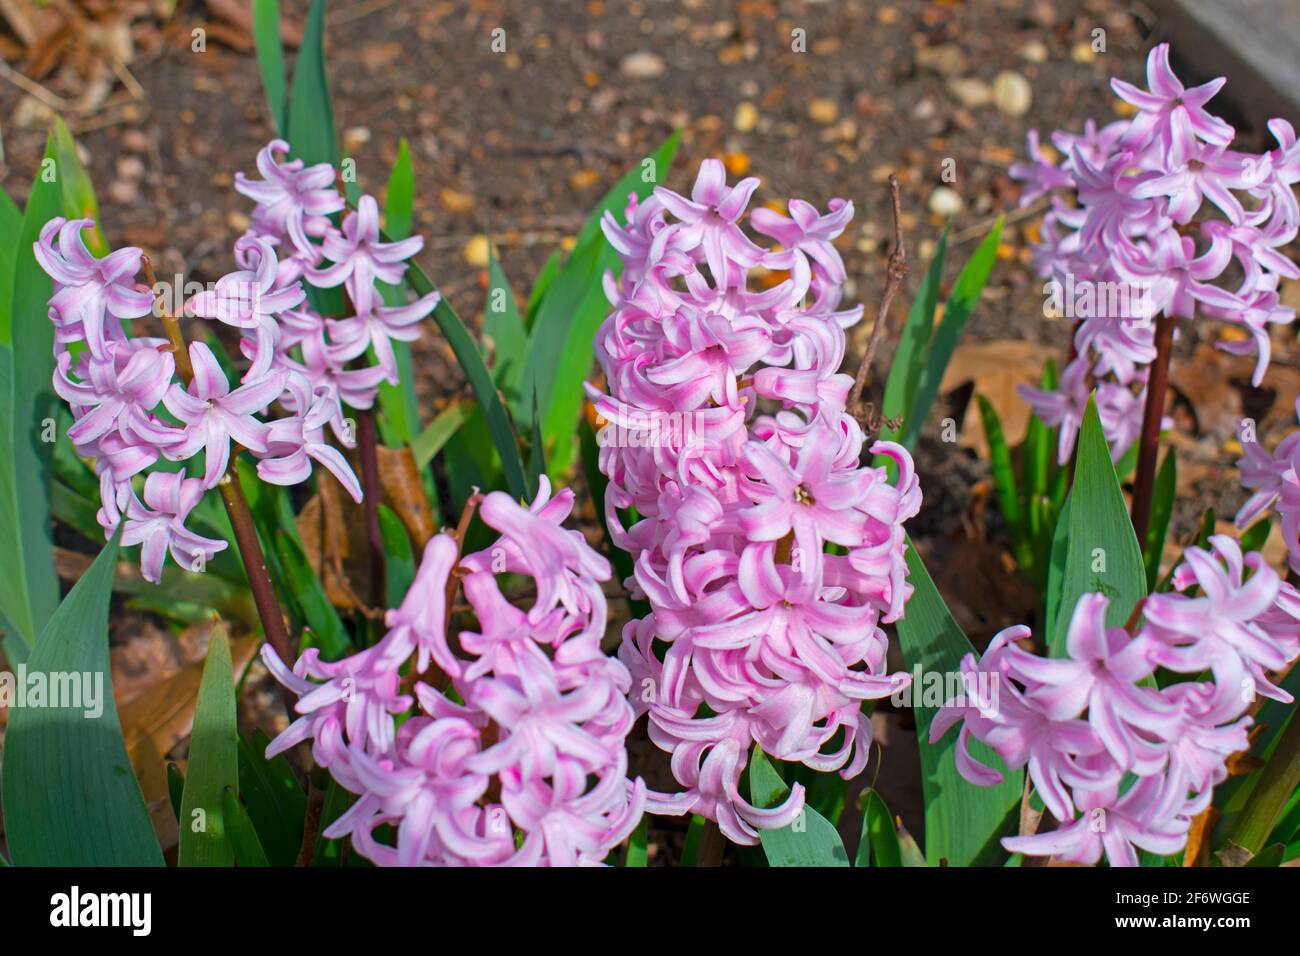 Fragrant pink hyacinth spiked flowers against a blurred background of green leaves and garden soil Stock Photo